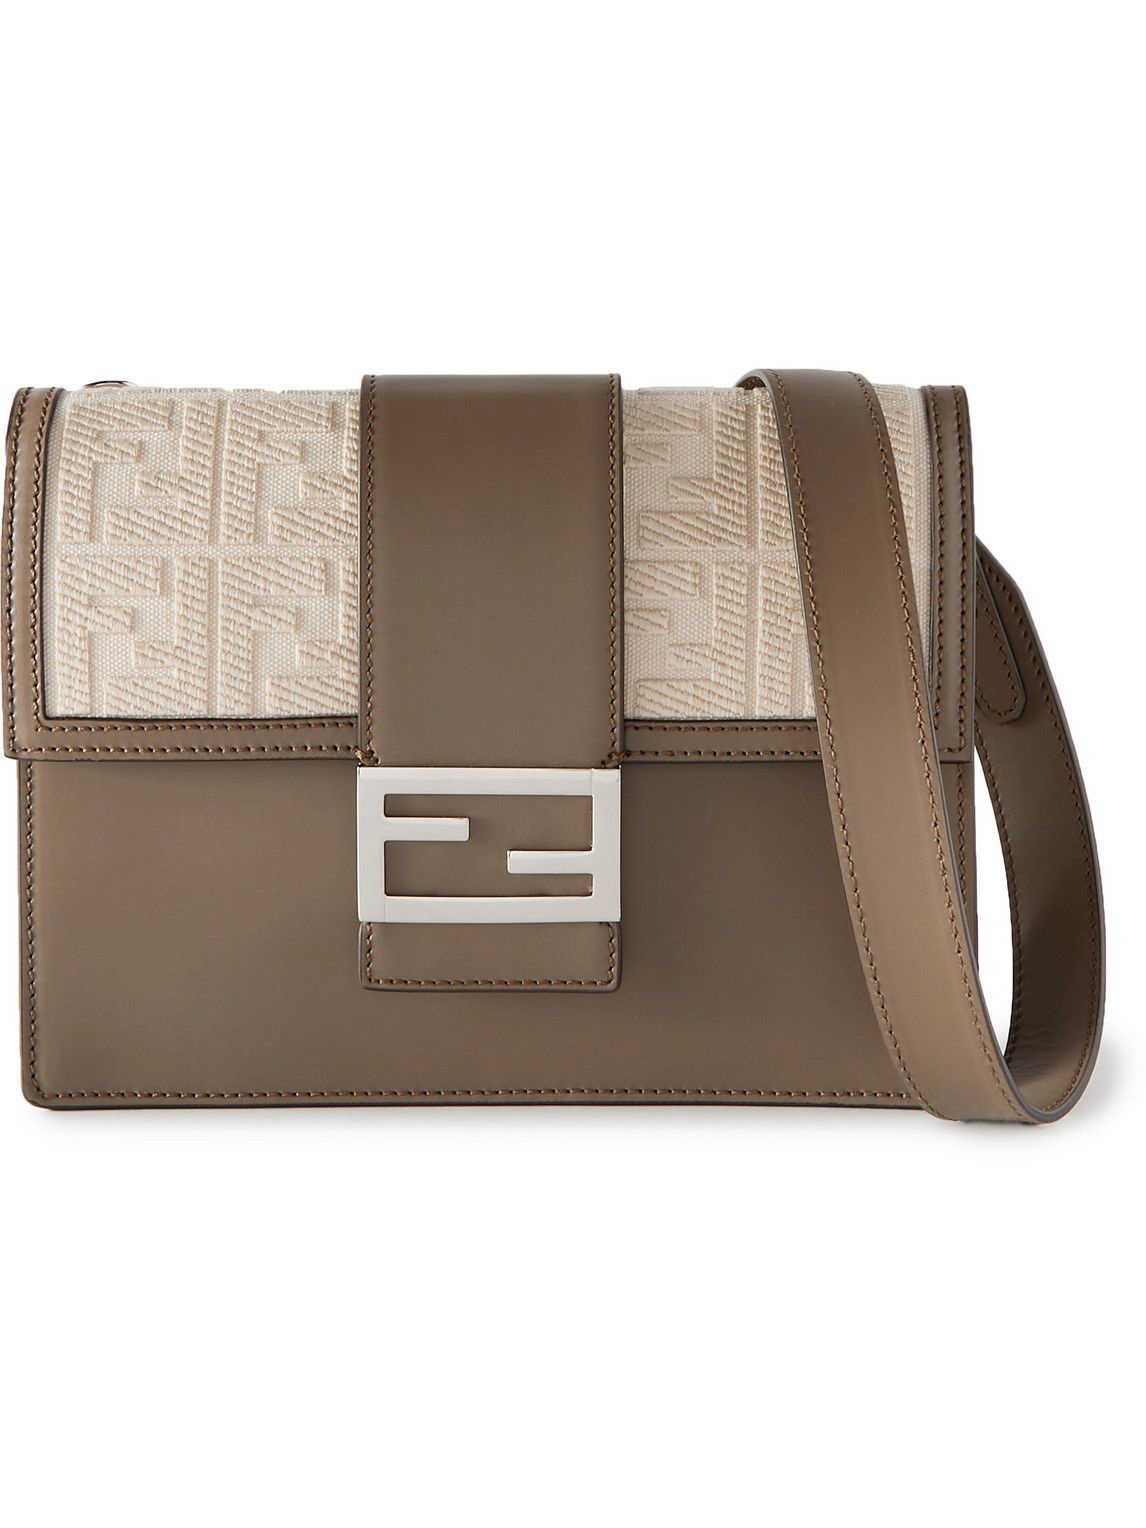 FENDI: Baguette bag in canvas with thread embroidered FF monogram -  Multicolor